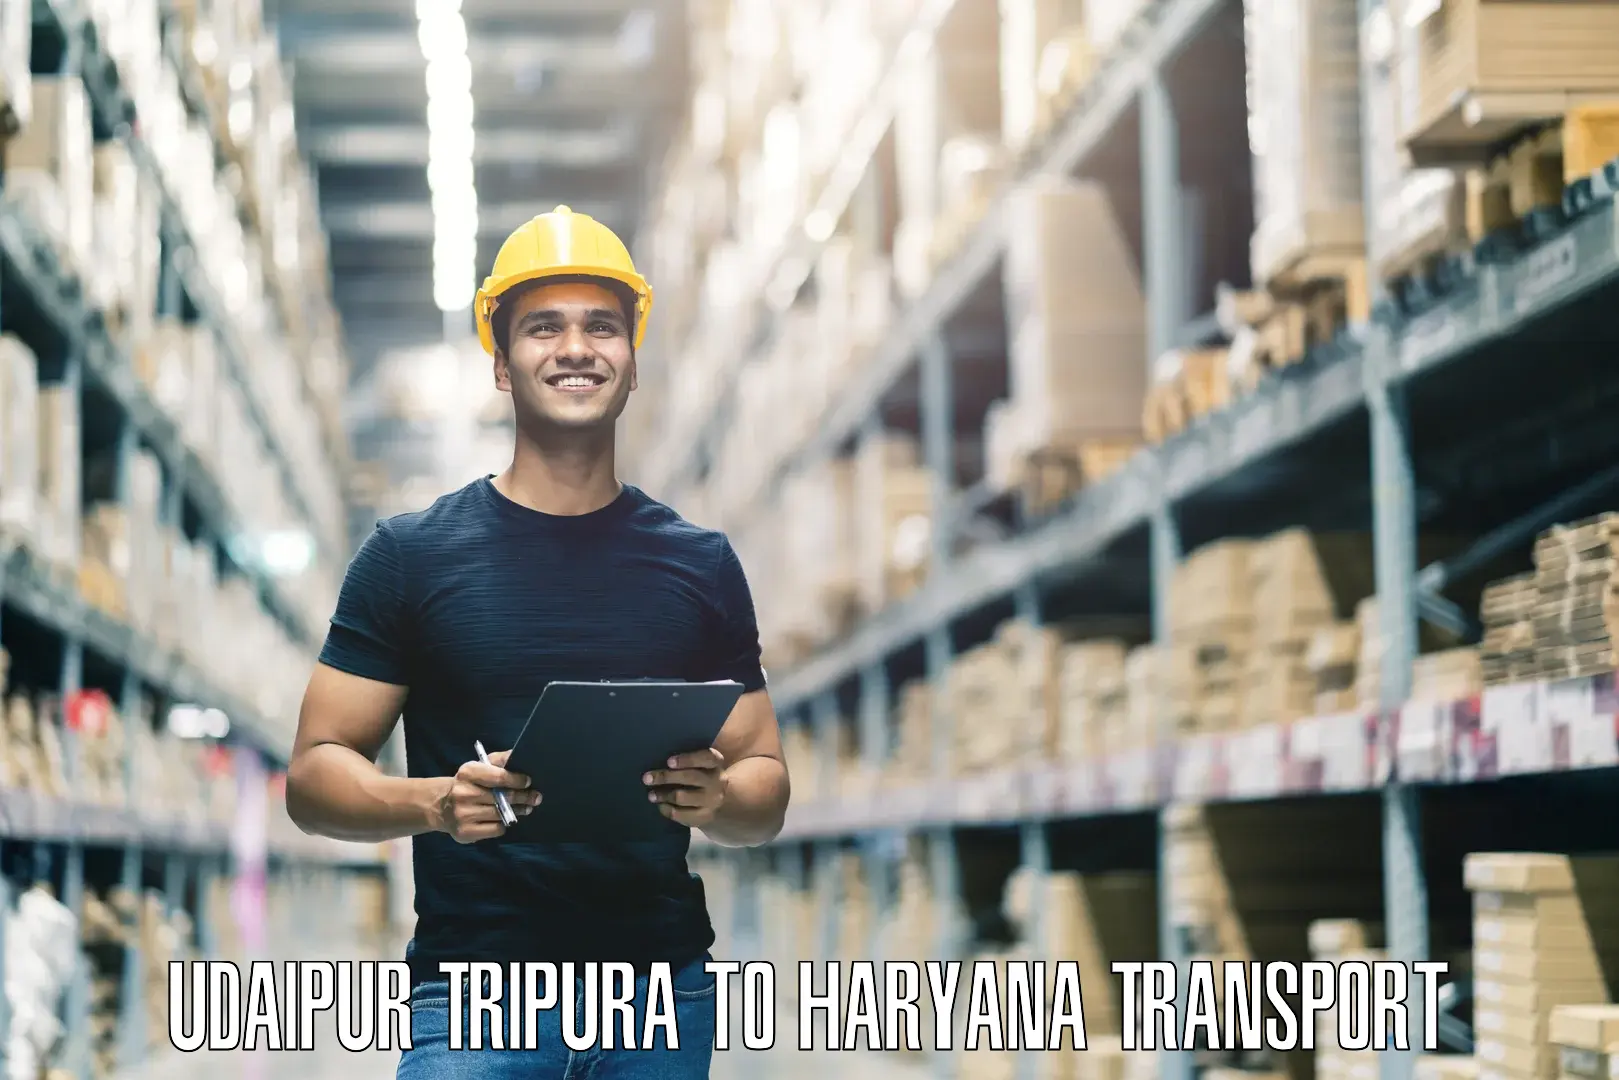 Transport shared services Udaipur Tripura to Haryana